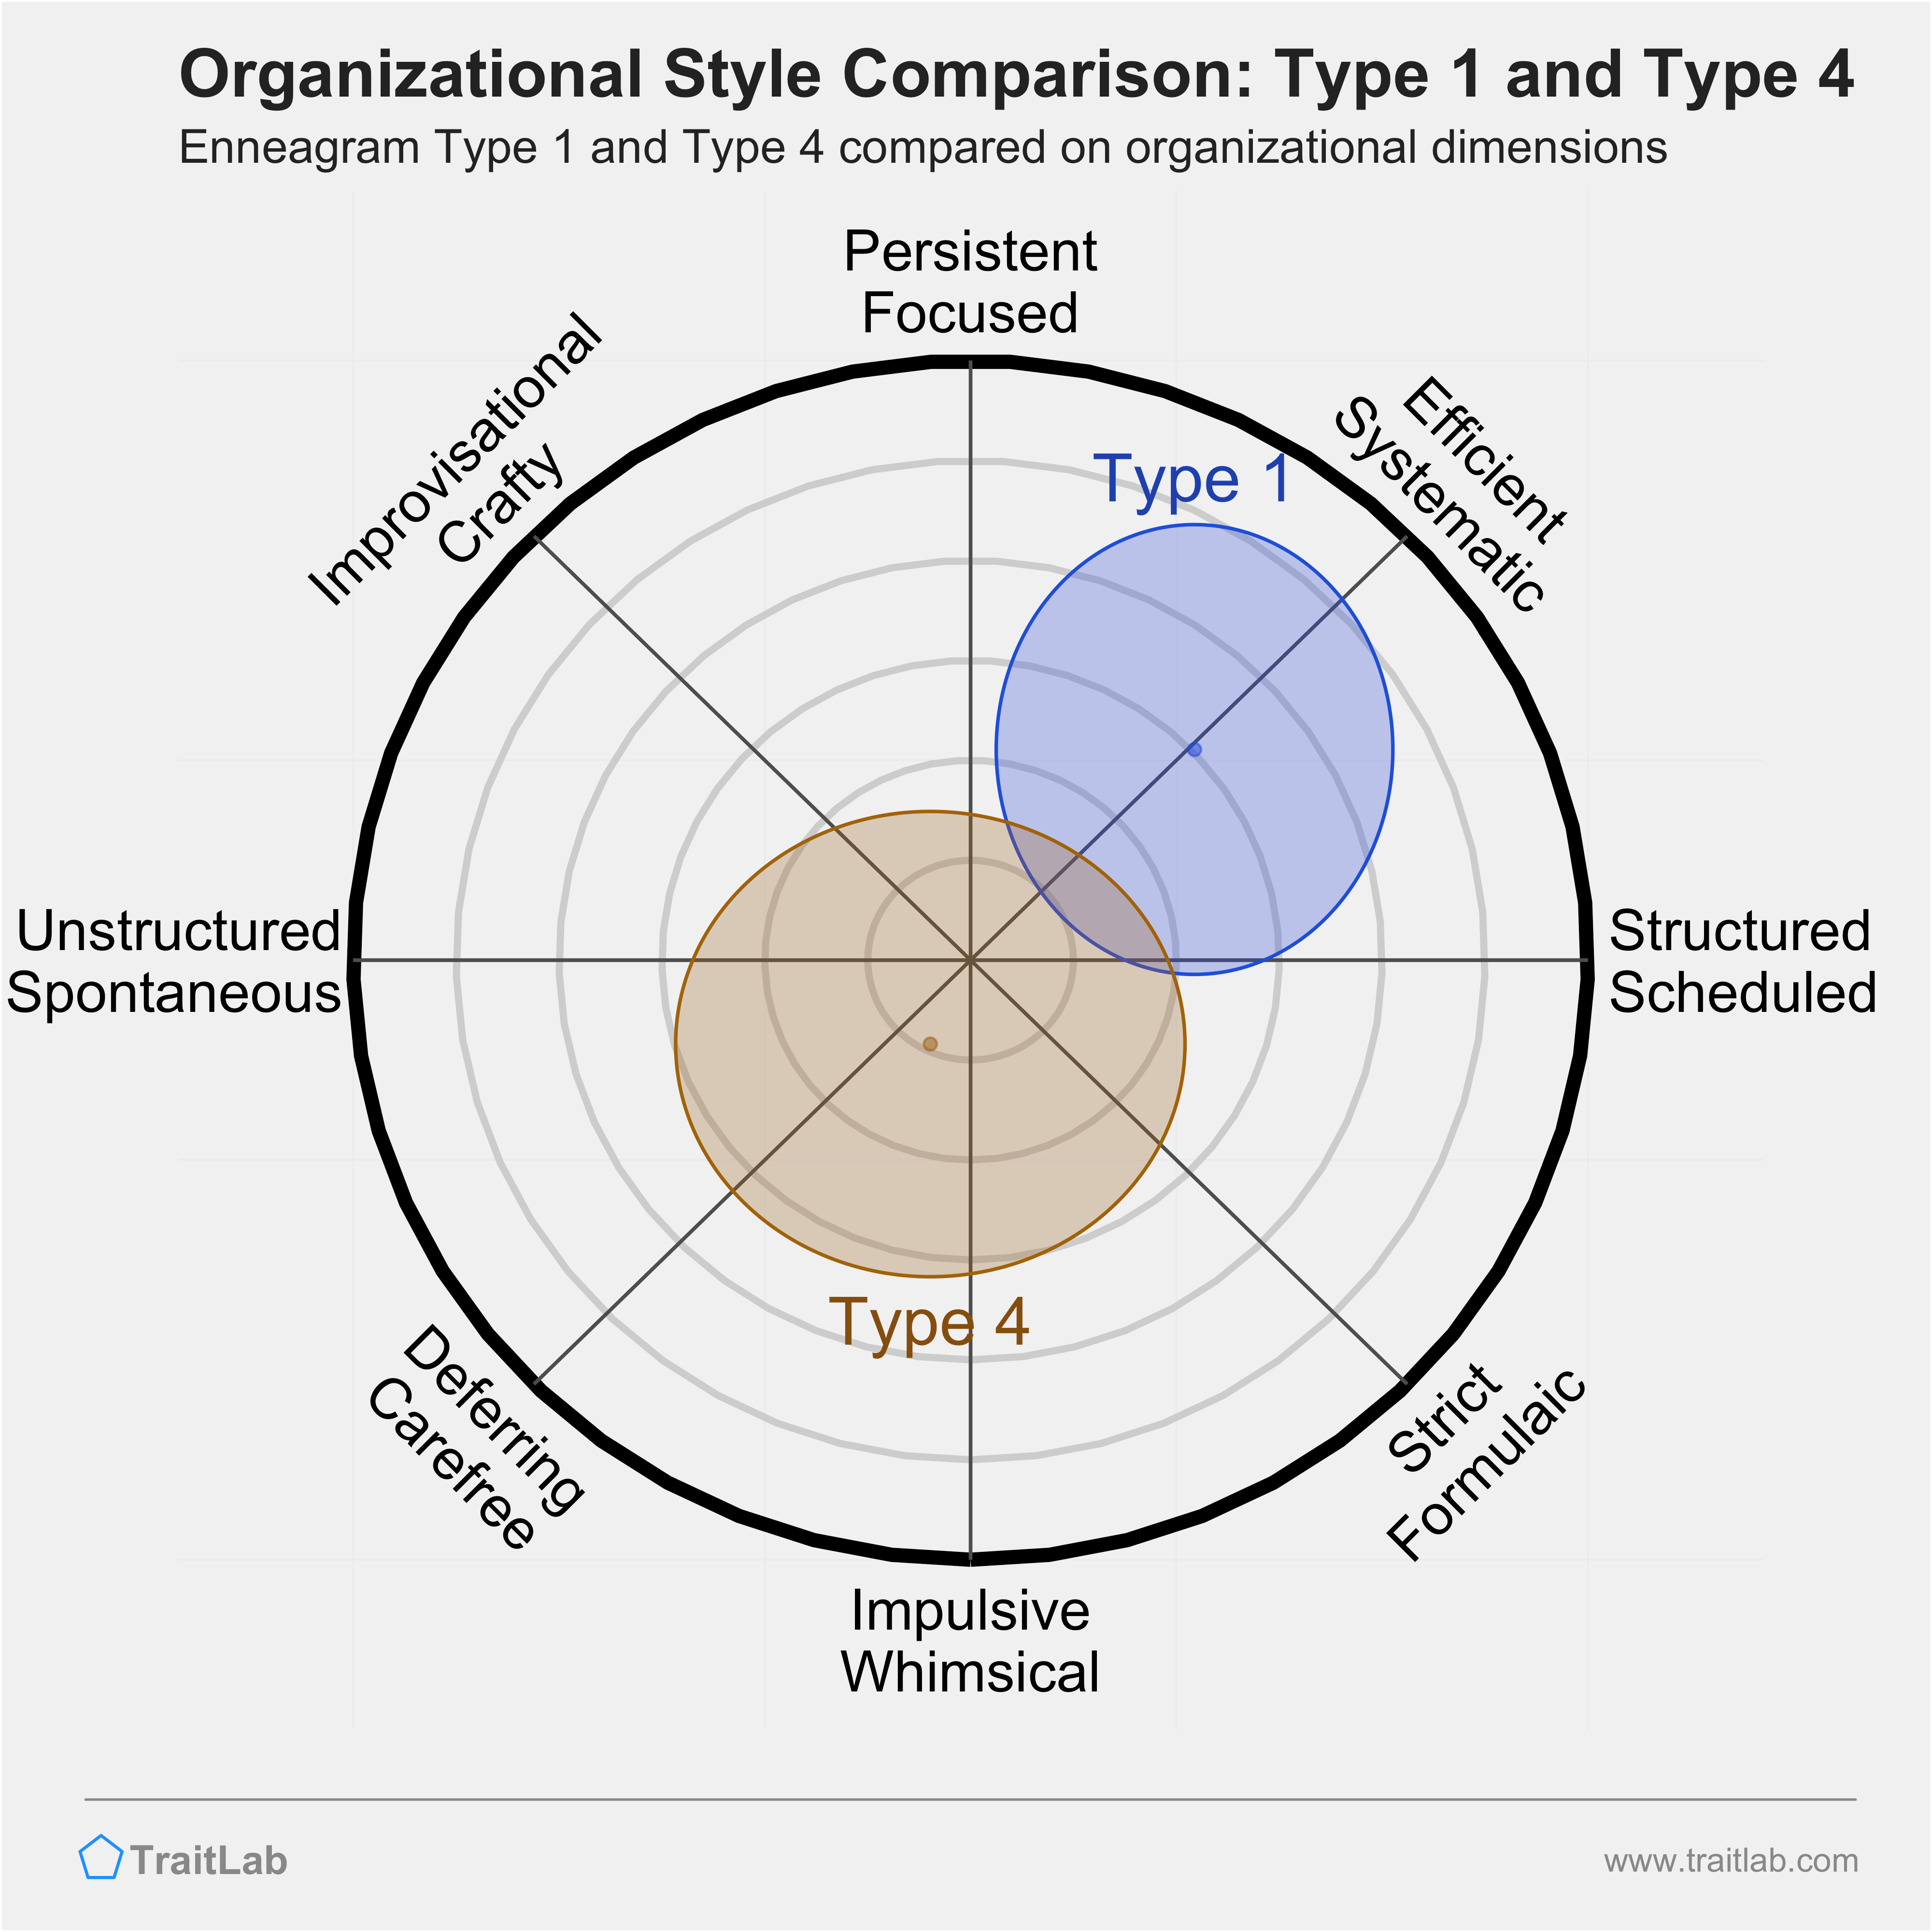 Type 1 and Type 4 comparison across organizational dimensions